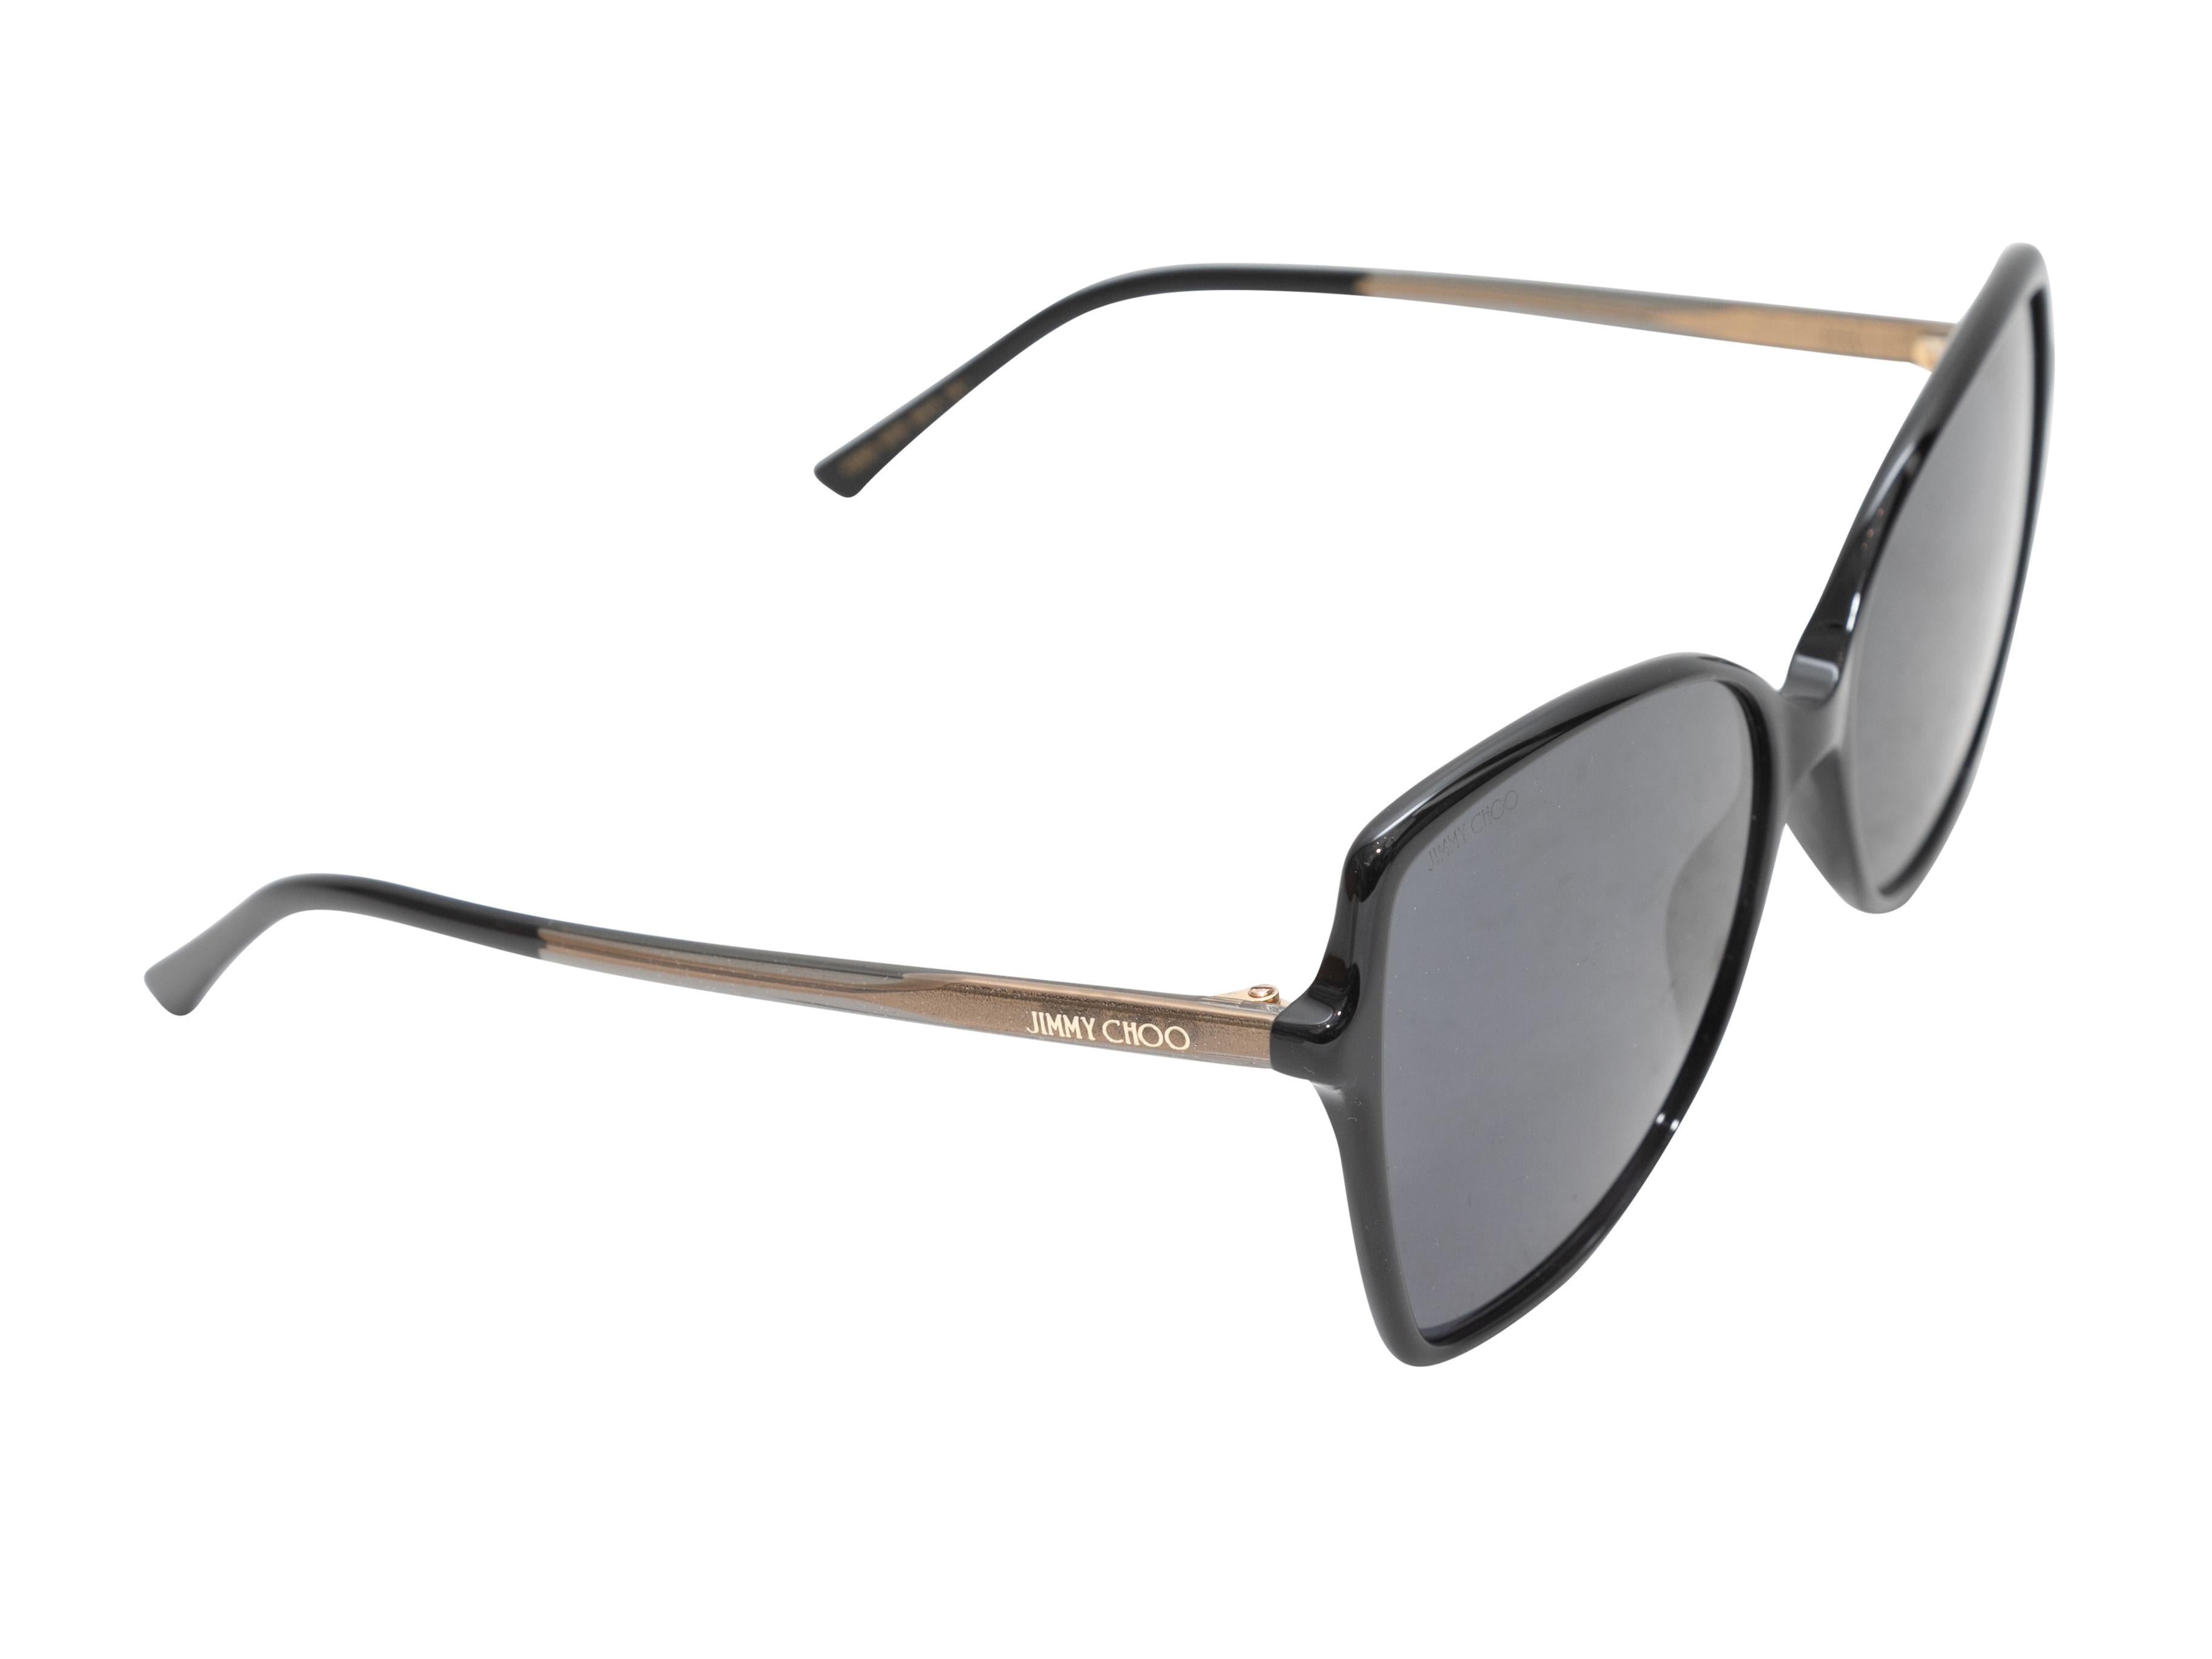 Black oversized sunglasses by Jimmy Choo. Grey tinted lenses. 2.25